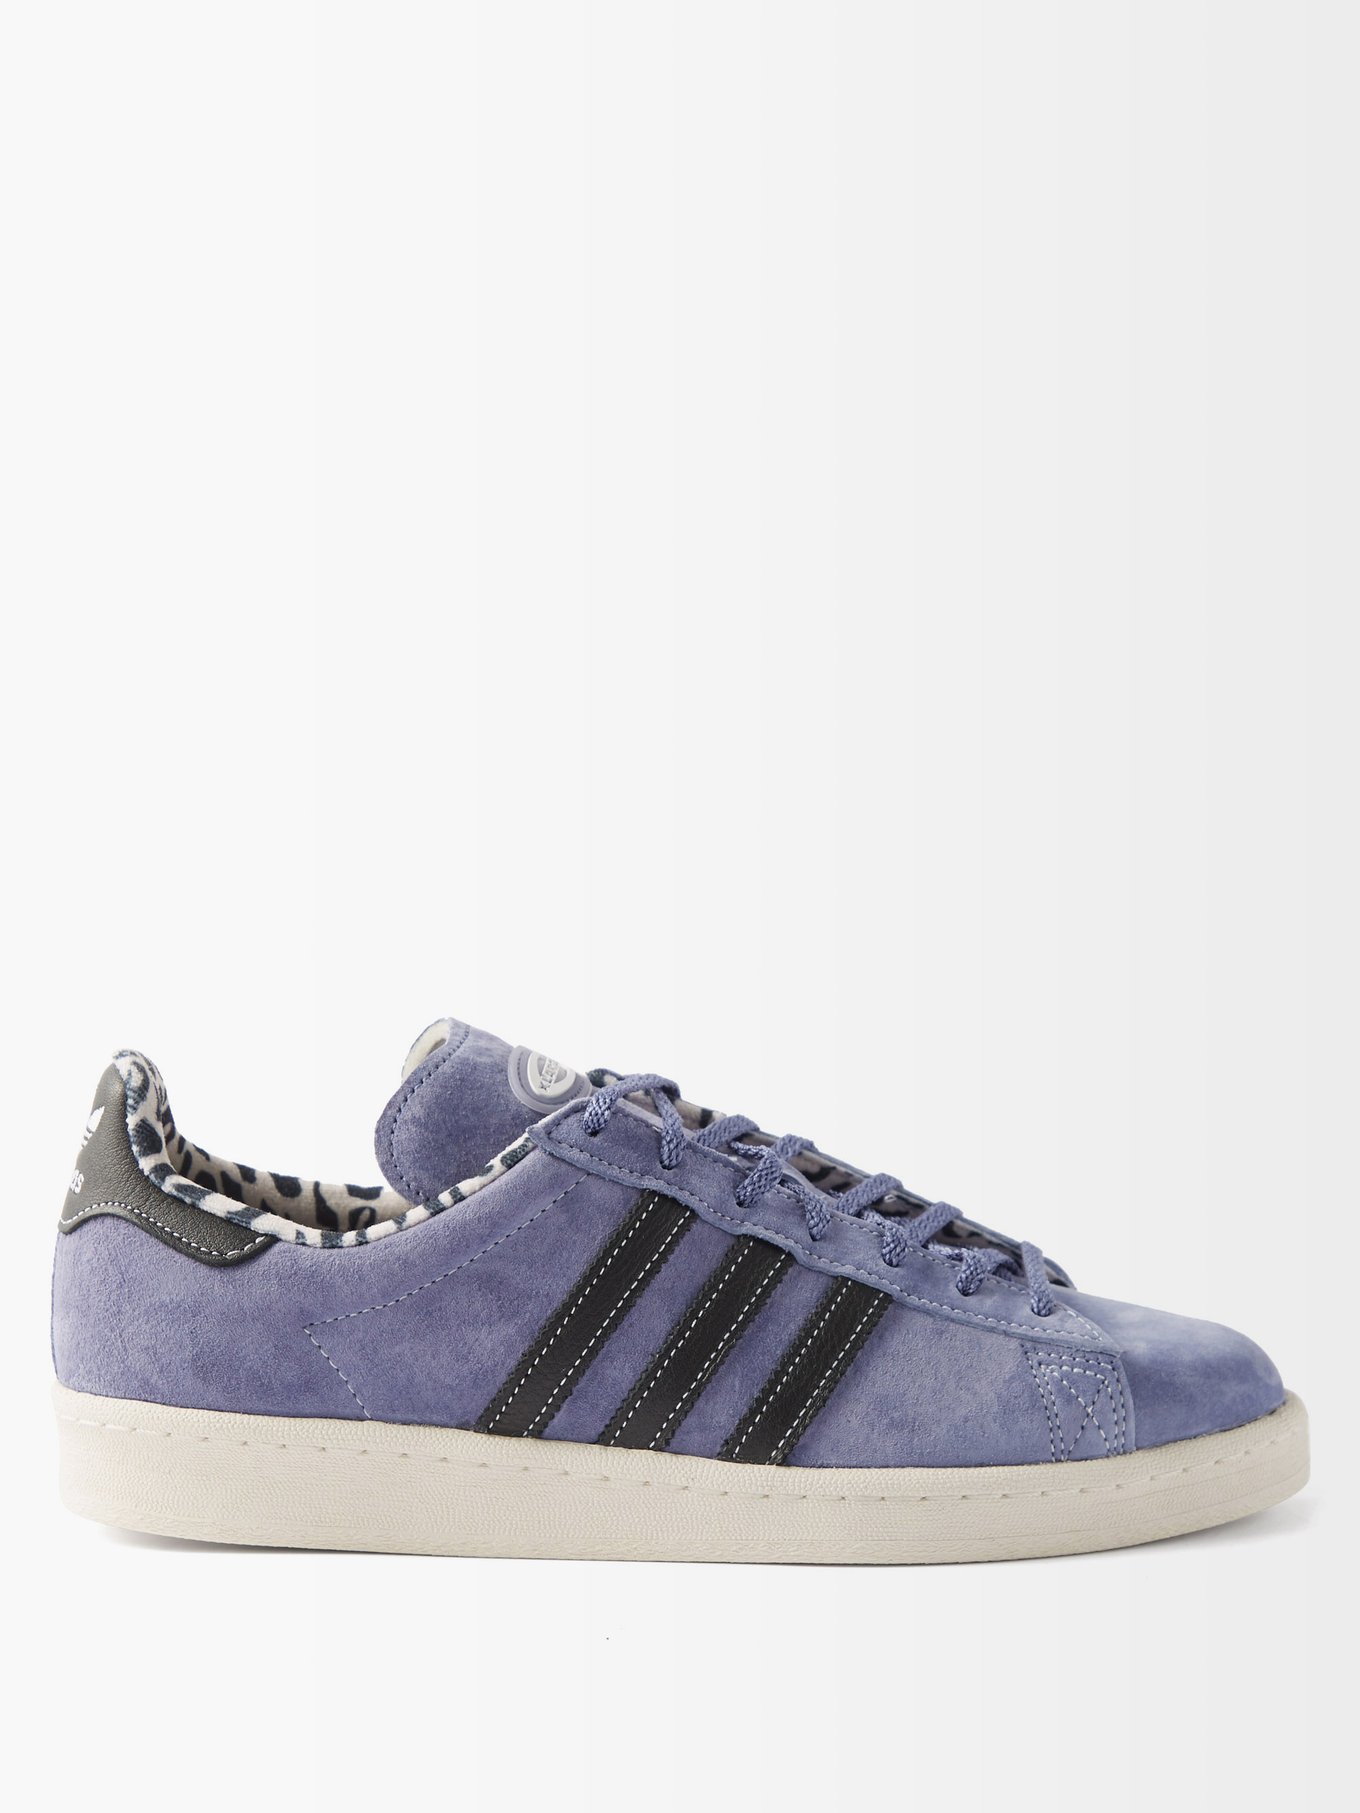 X XLarge Campus 80 suede trainers | Adidas